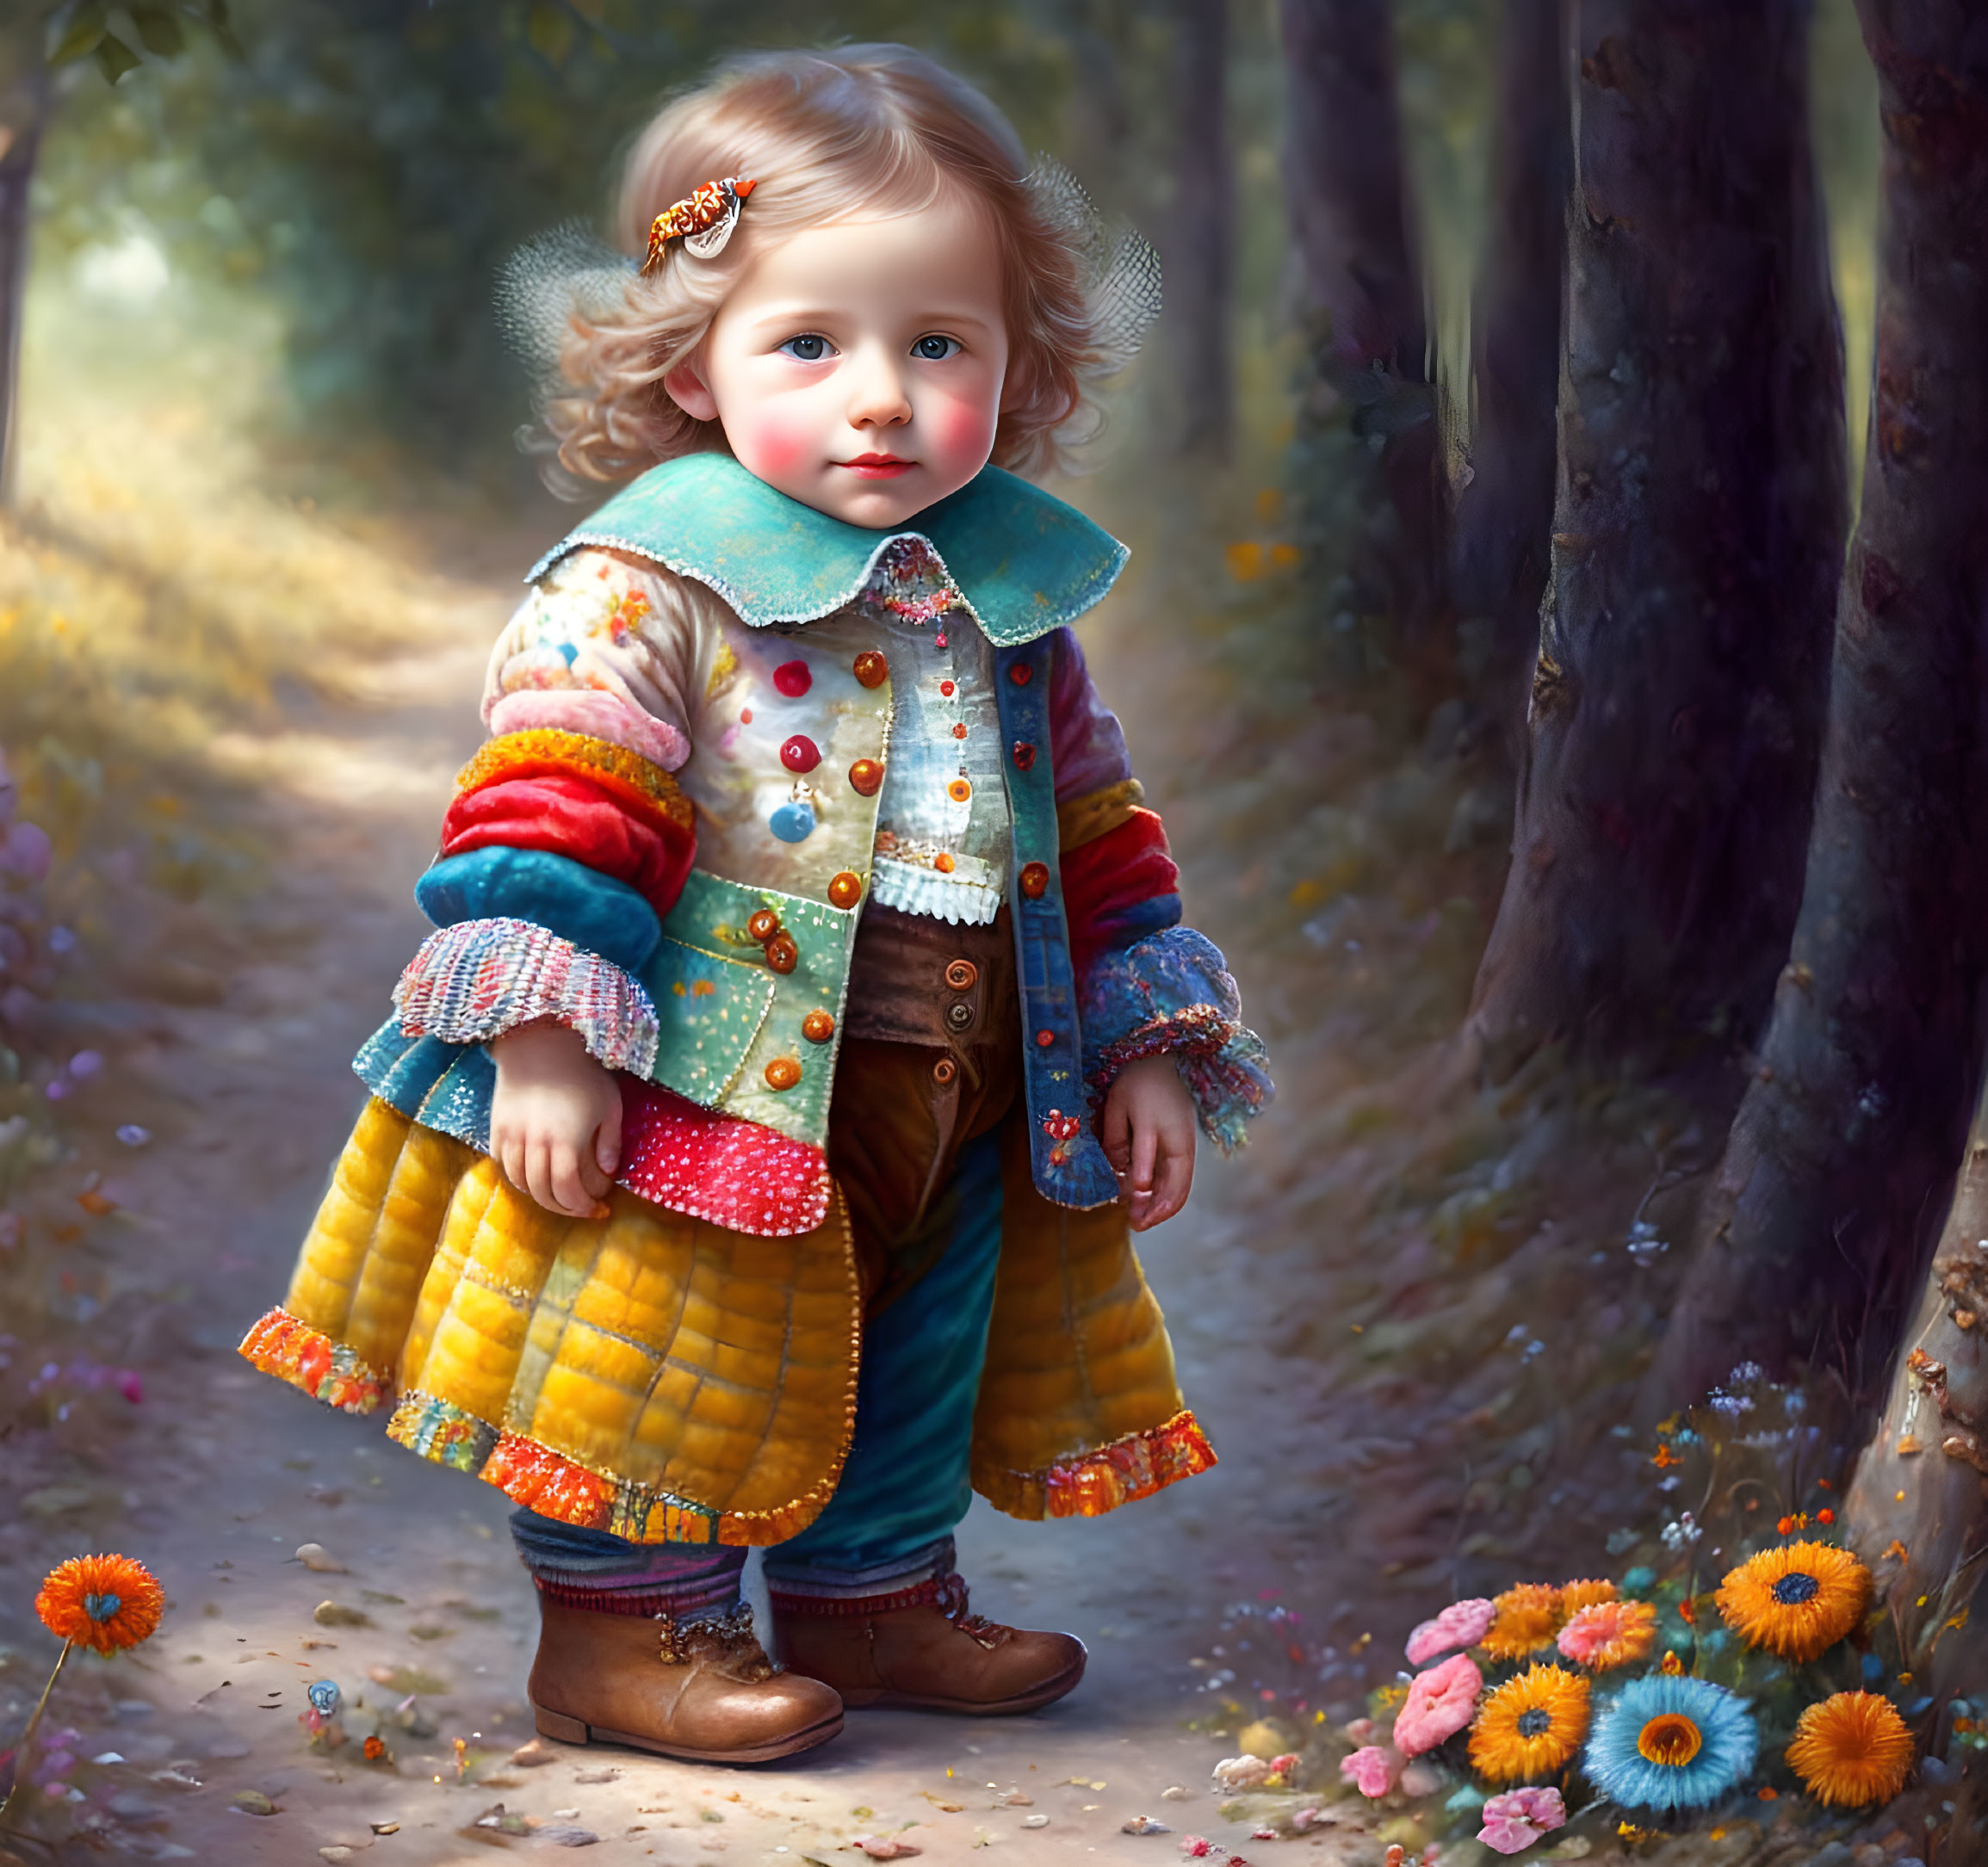 Colorful Outfit Child in Sunlit Forest Path with Flowers